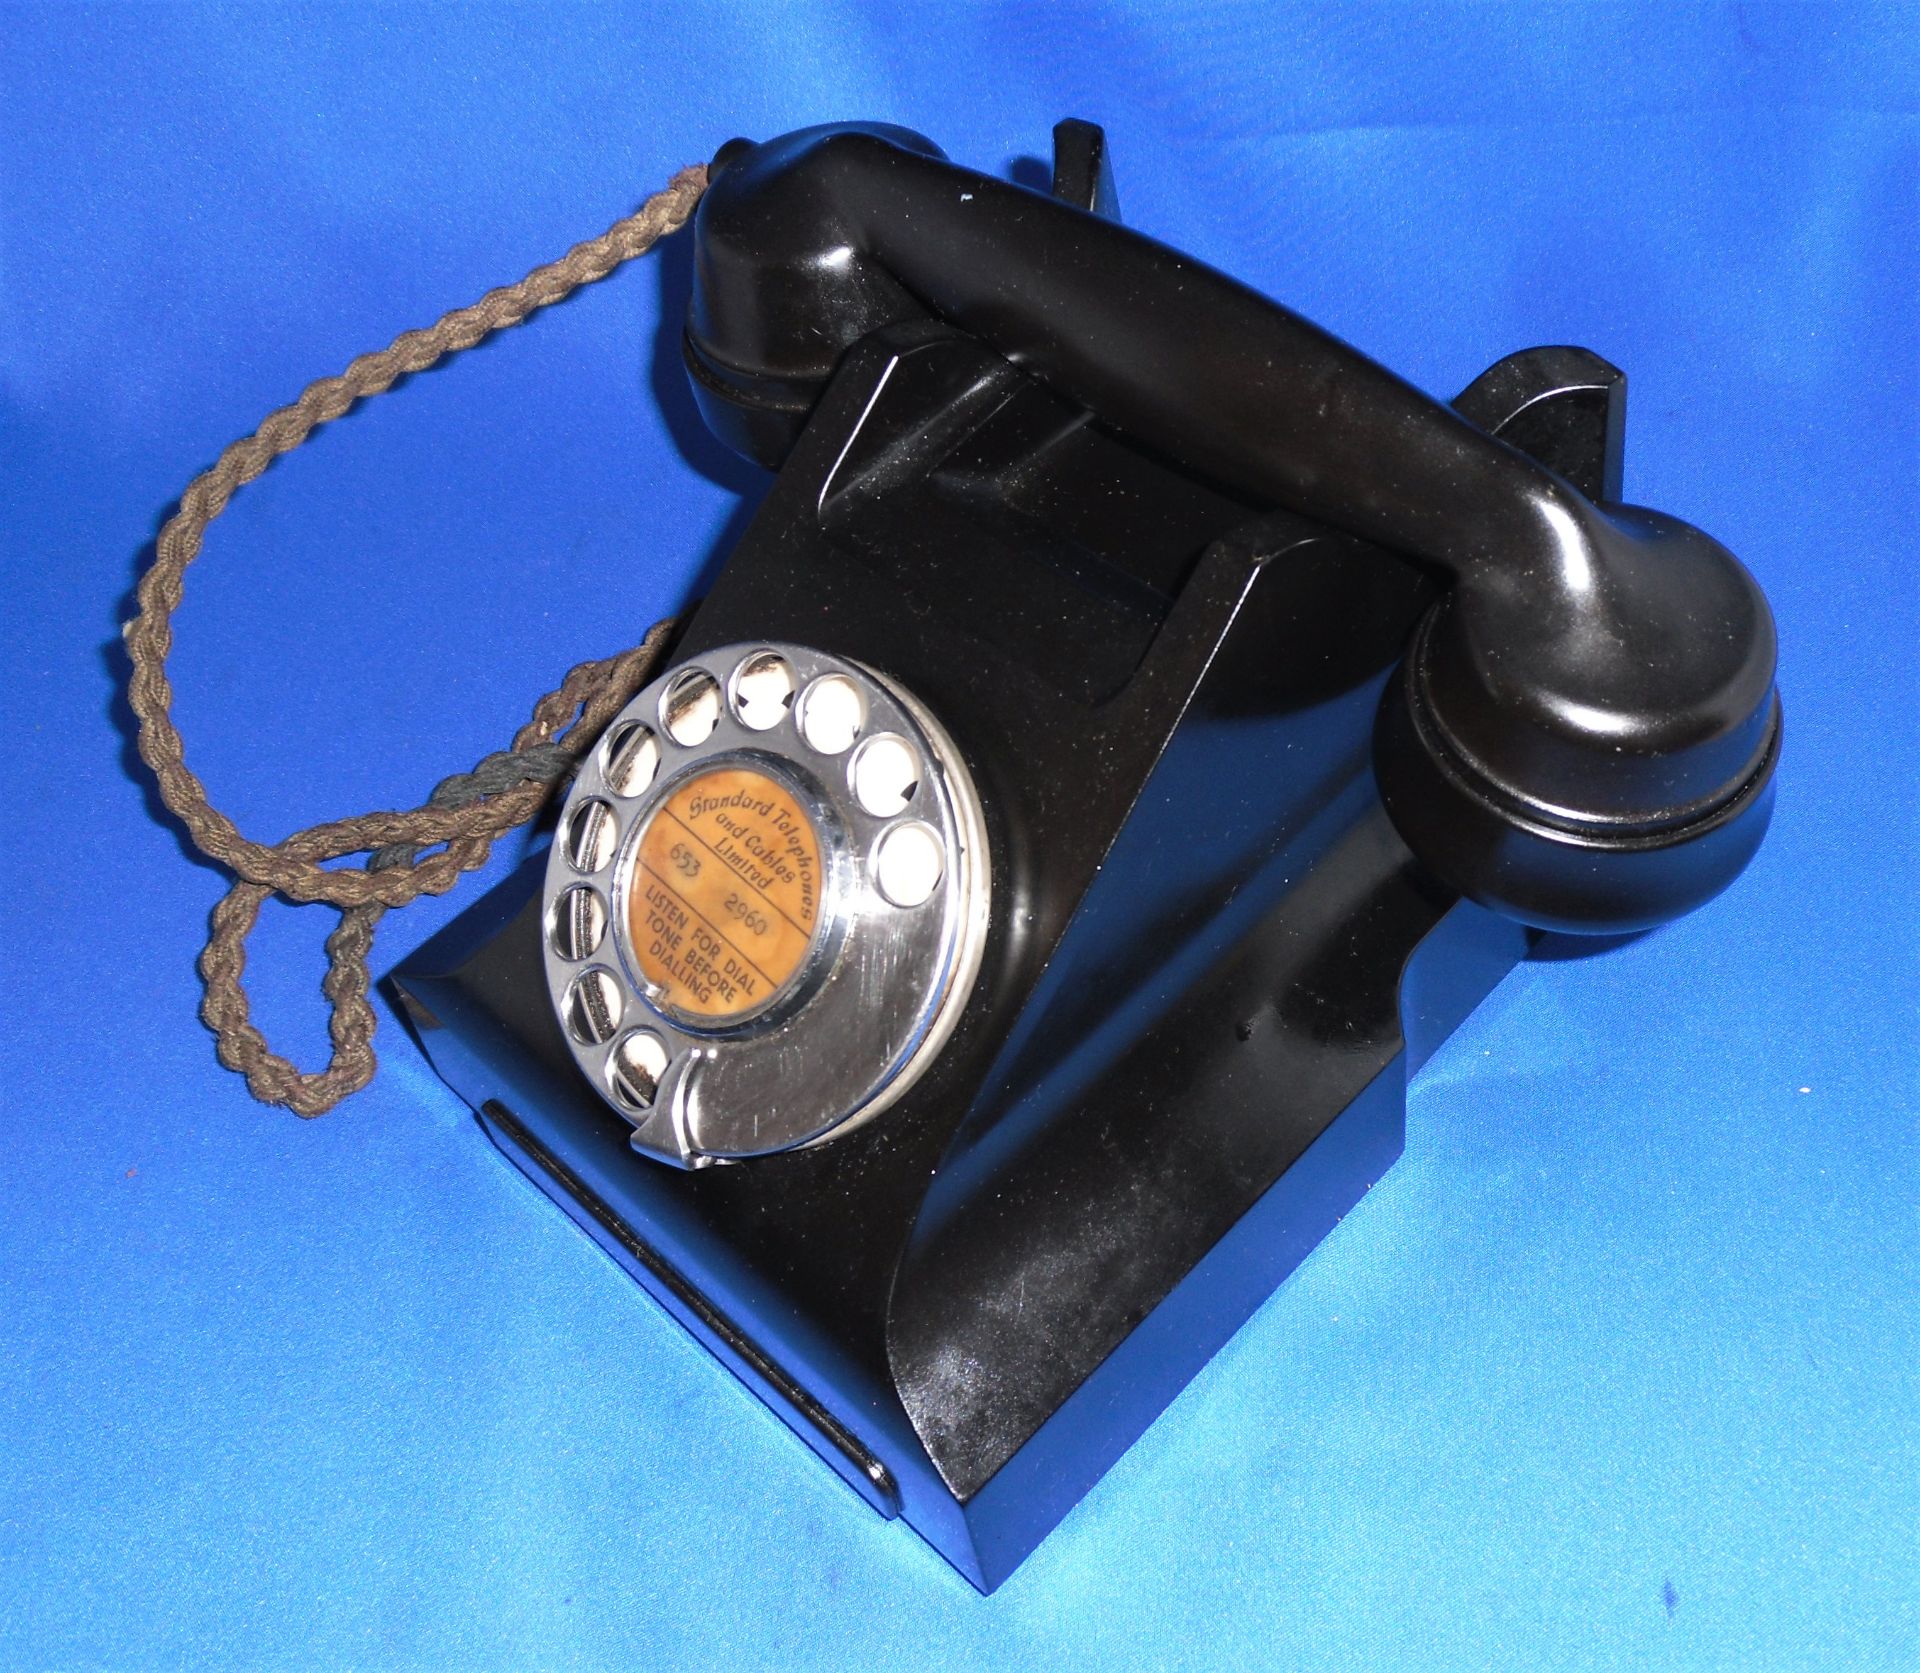 Vintage Bakelite Telephone Standard Telephone and Cables Limited 1958 - Image 2 of 8